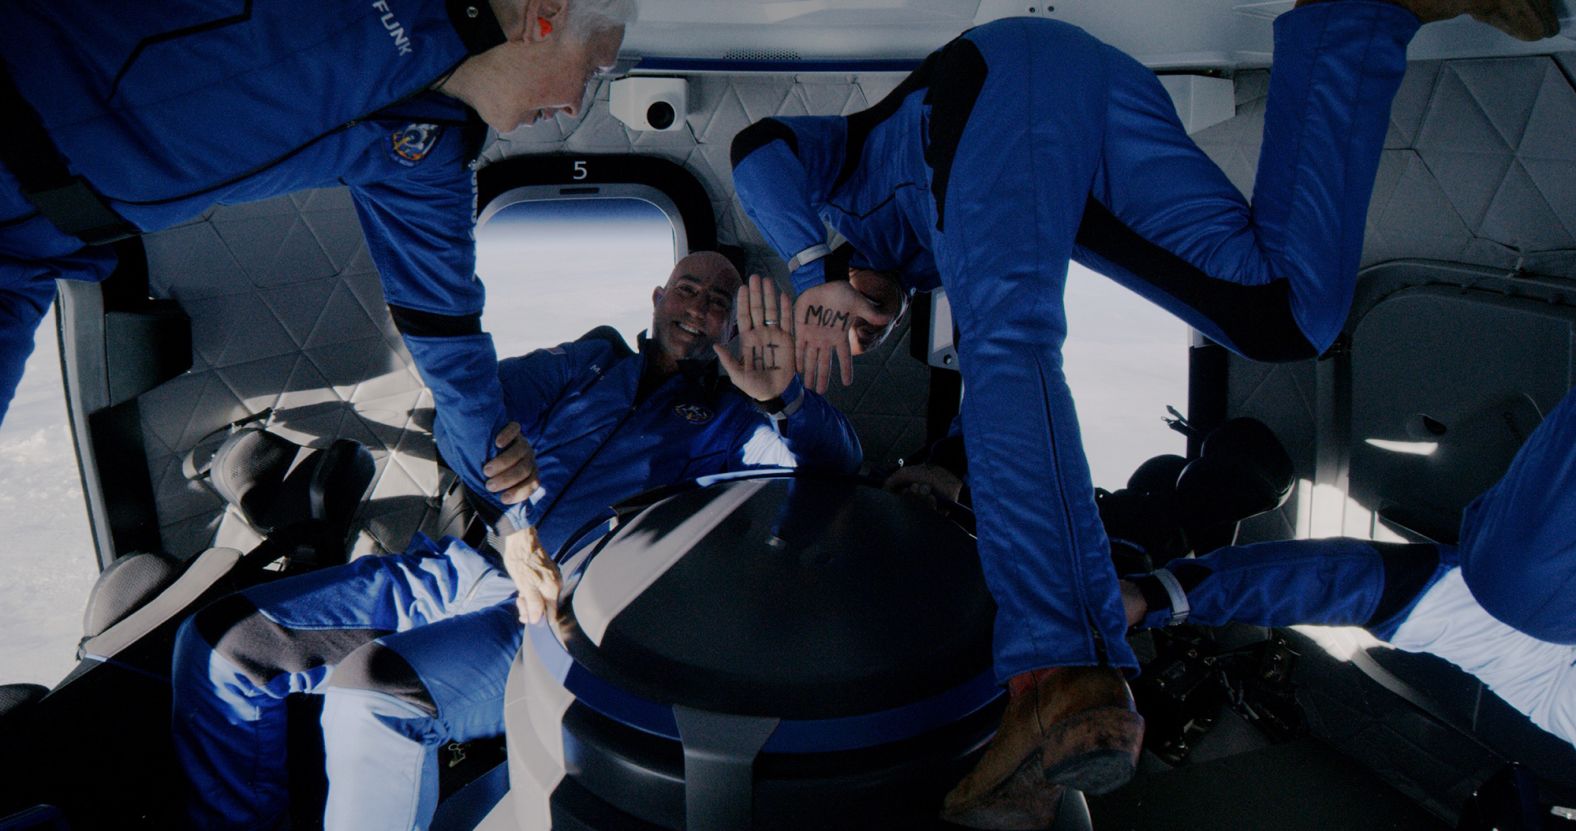 Mark and Jeff Bezos show "Hi Mom" written on their hands as the crew floats weightlessly in their capsule at the edge of space.